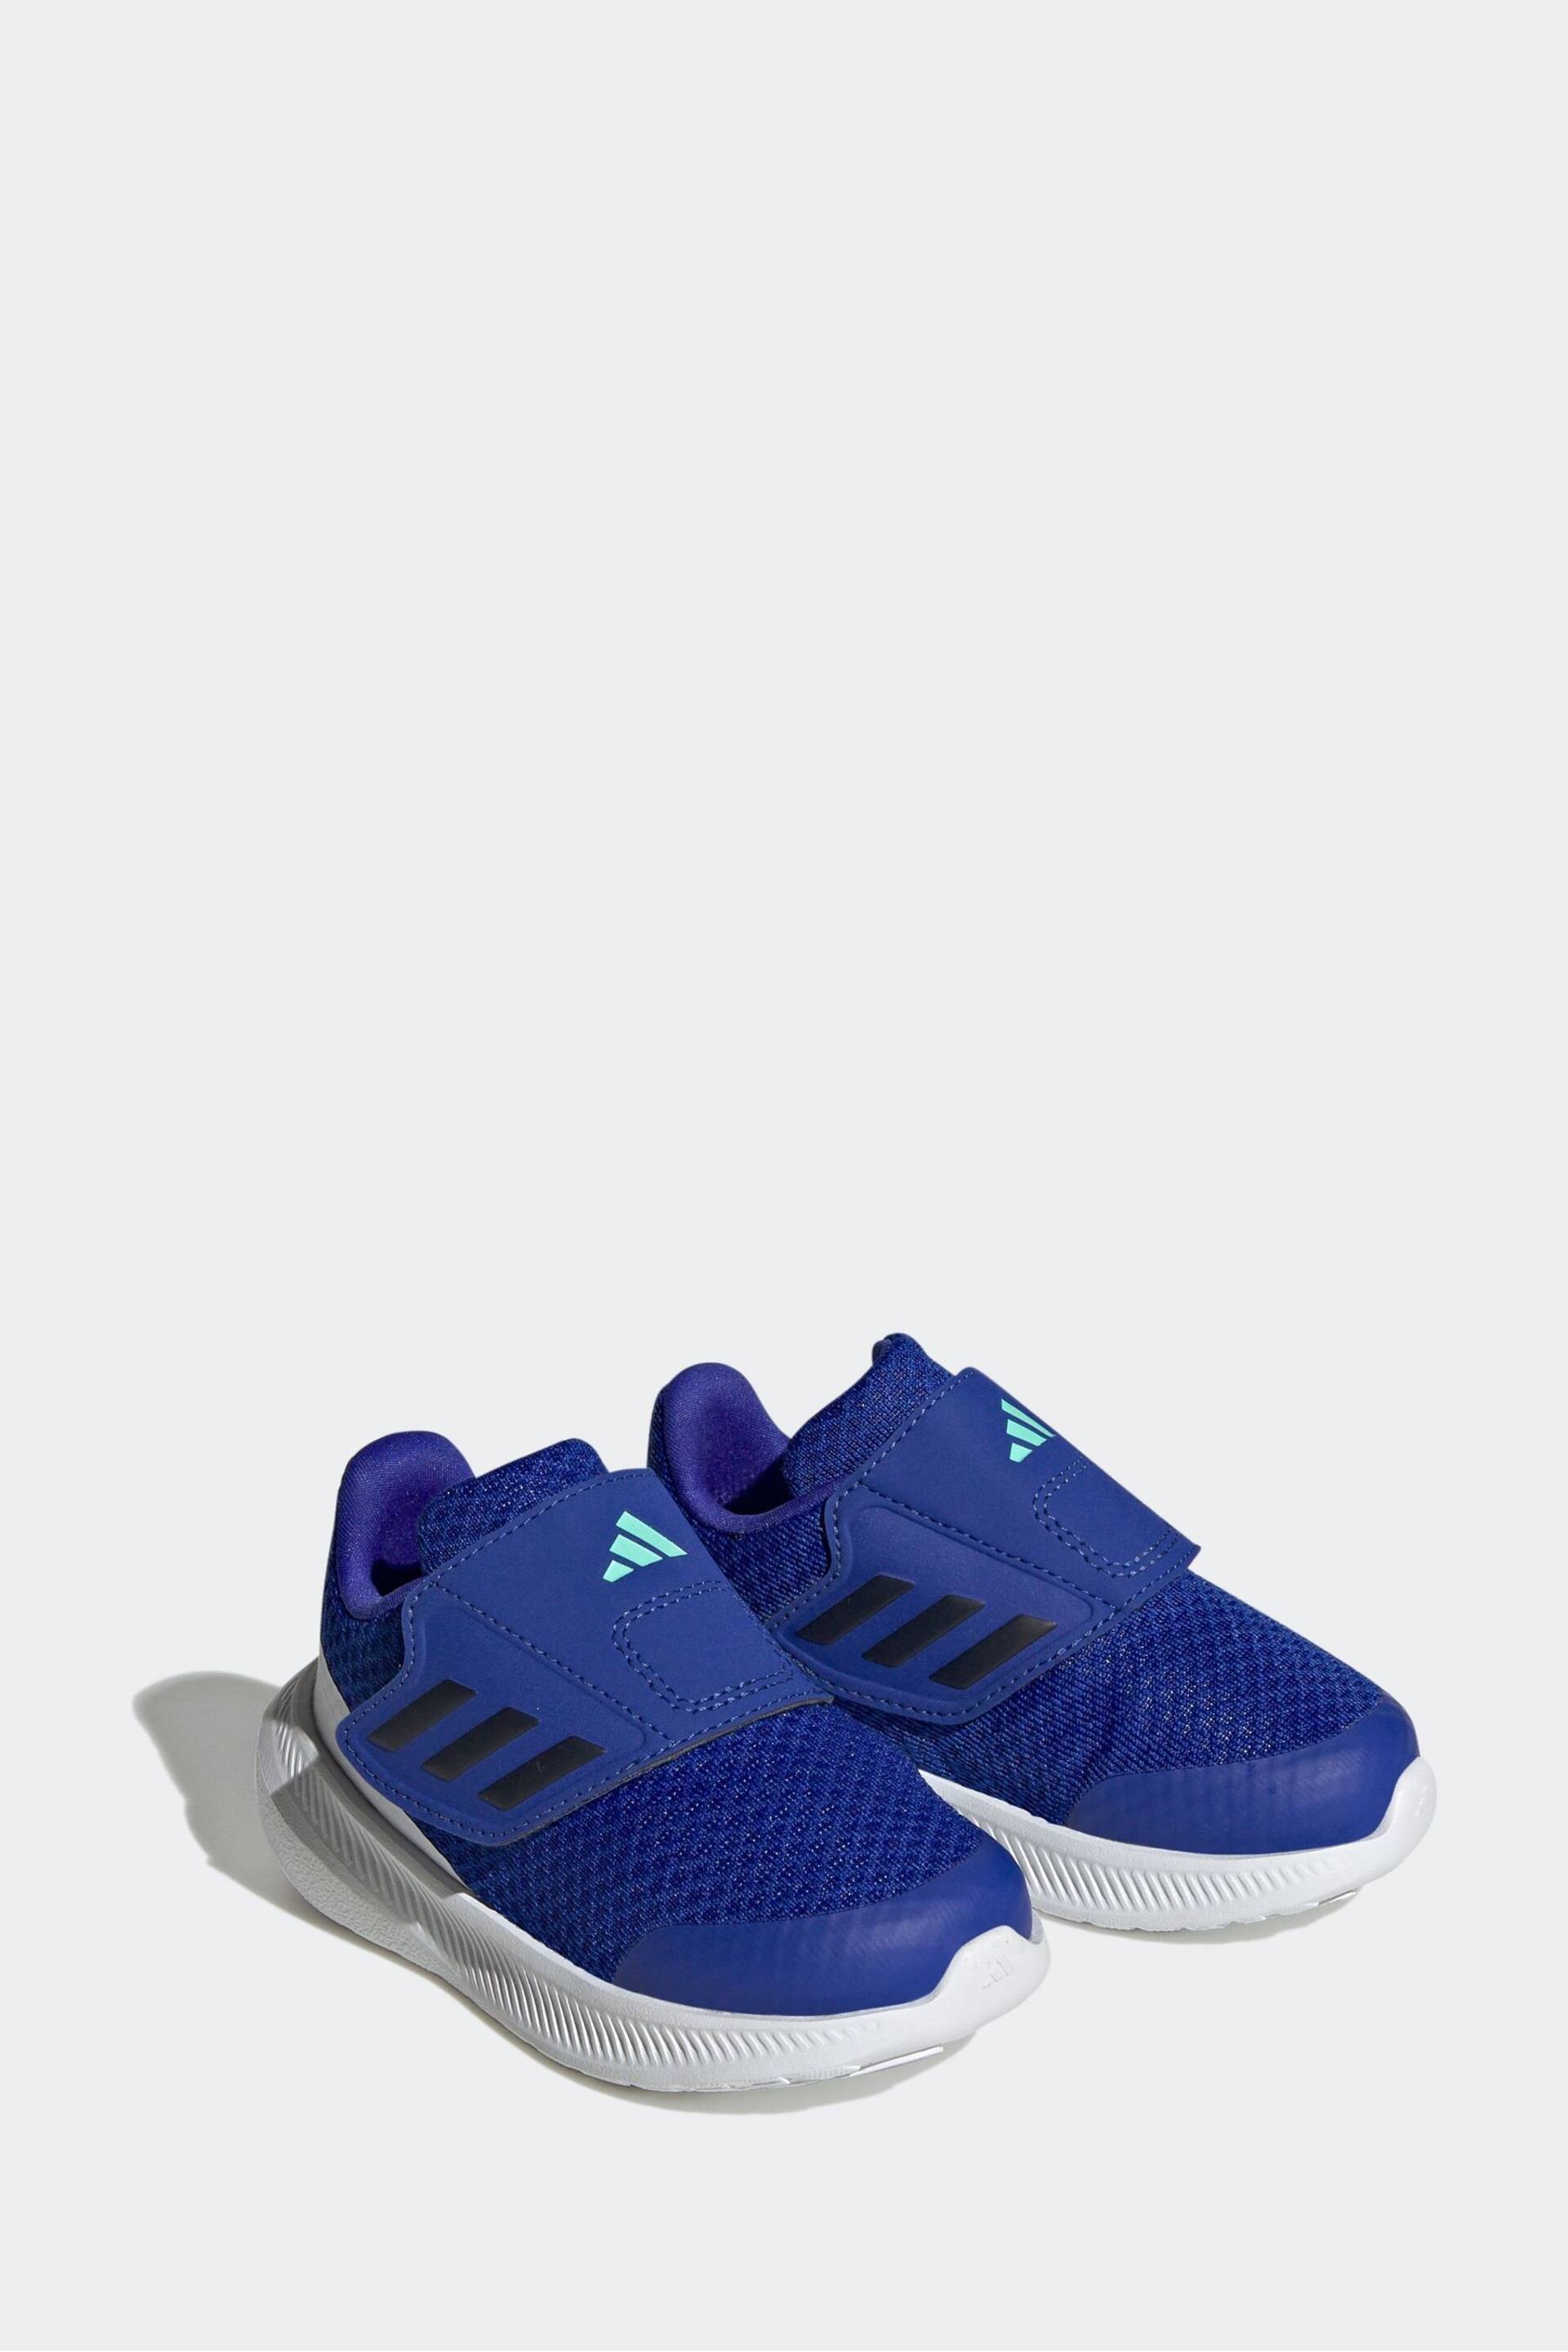 adidas Blue Sportswear Runfalcon 3.0 Hook And Loop Trainers - Image 4 of 9